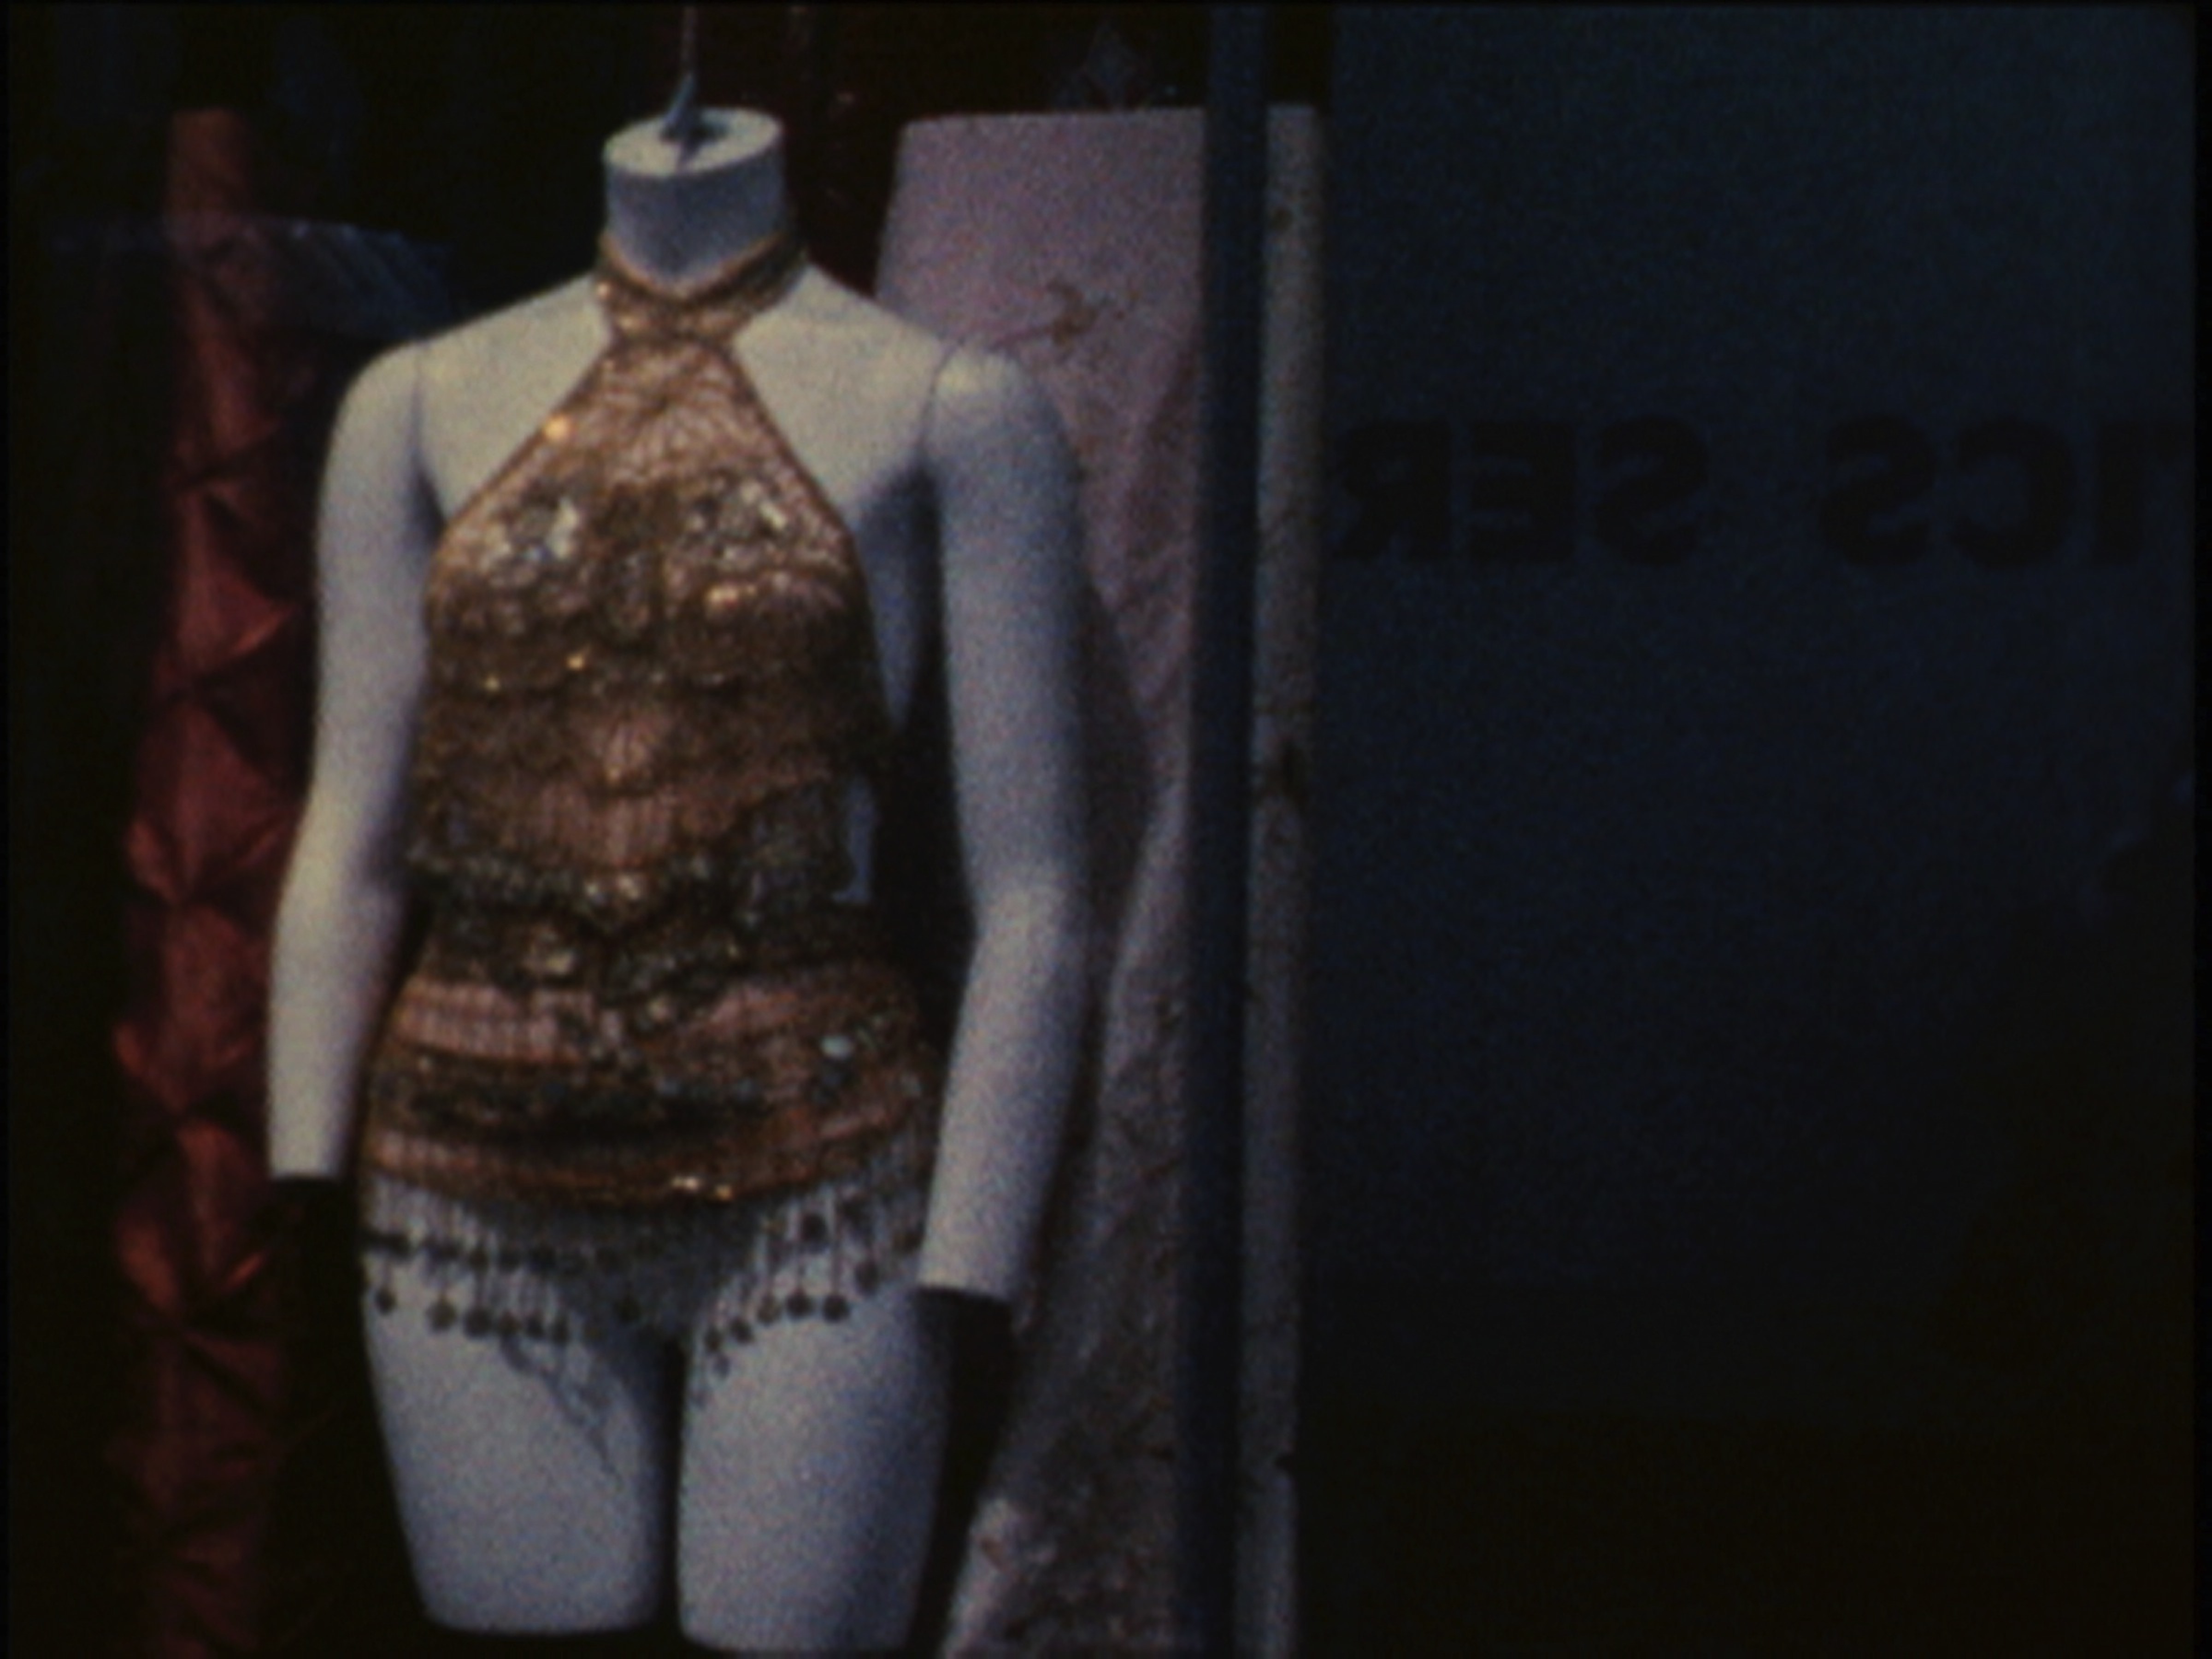 A film still from "Someday Behind Coney Island" (Stephanie Gray, Super 8, 2011). Courtesy of the filmmaker.